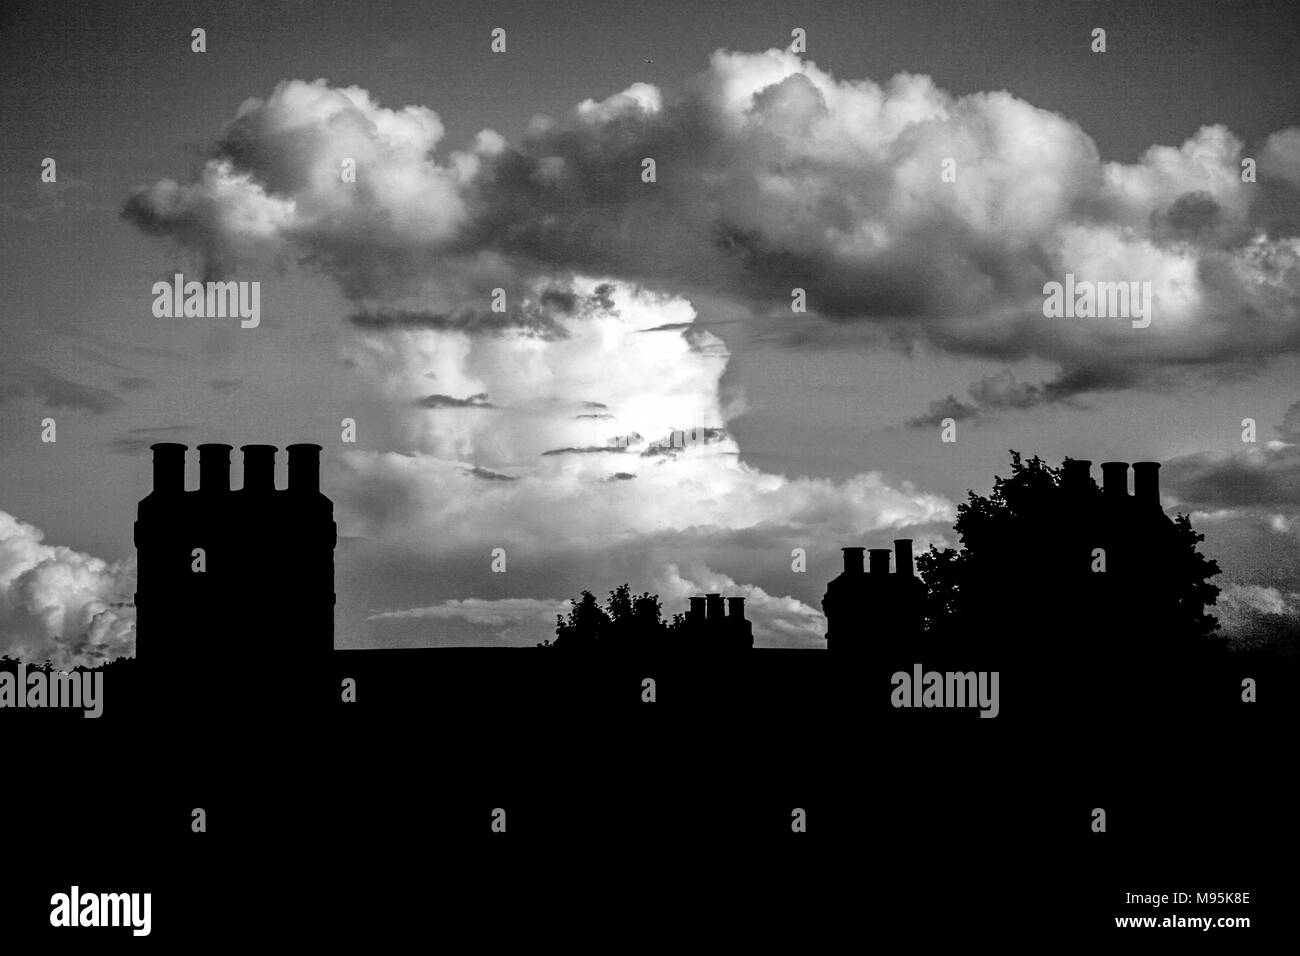 A fantastic cloud formation on the horizon behind the silhouetted form of chimney stacks, South London. UK Stock Photo